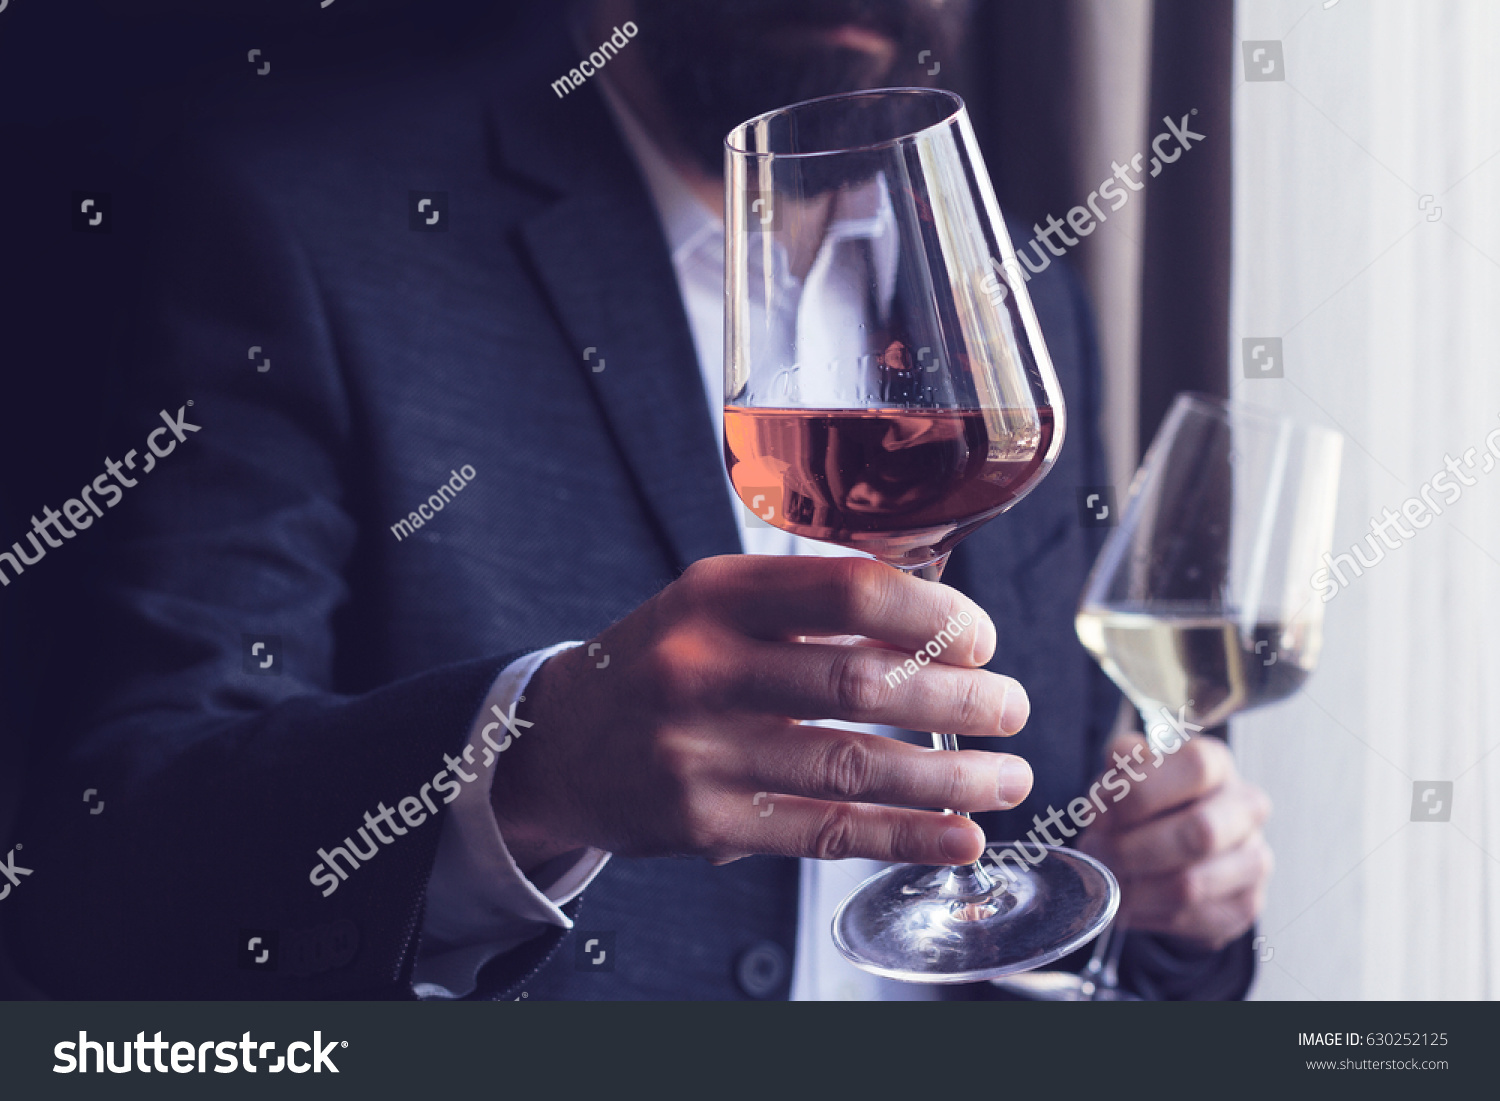 horizontal close up of a Caucasian man with beard black suit and white shirt offering a tall glass of rose wine at an event by the window natural light #630252125